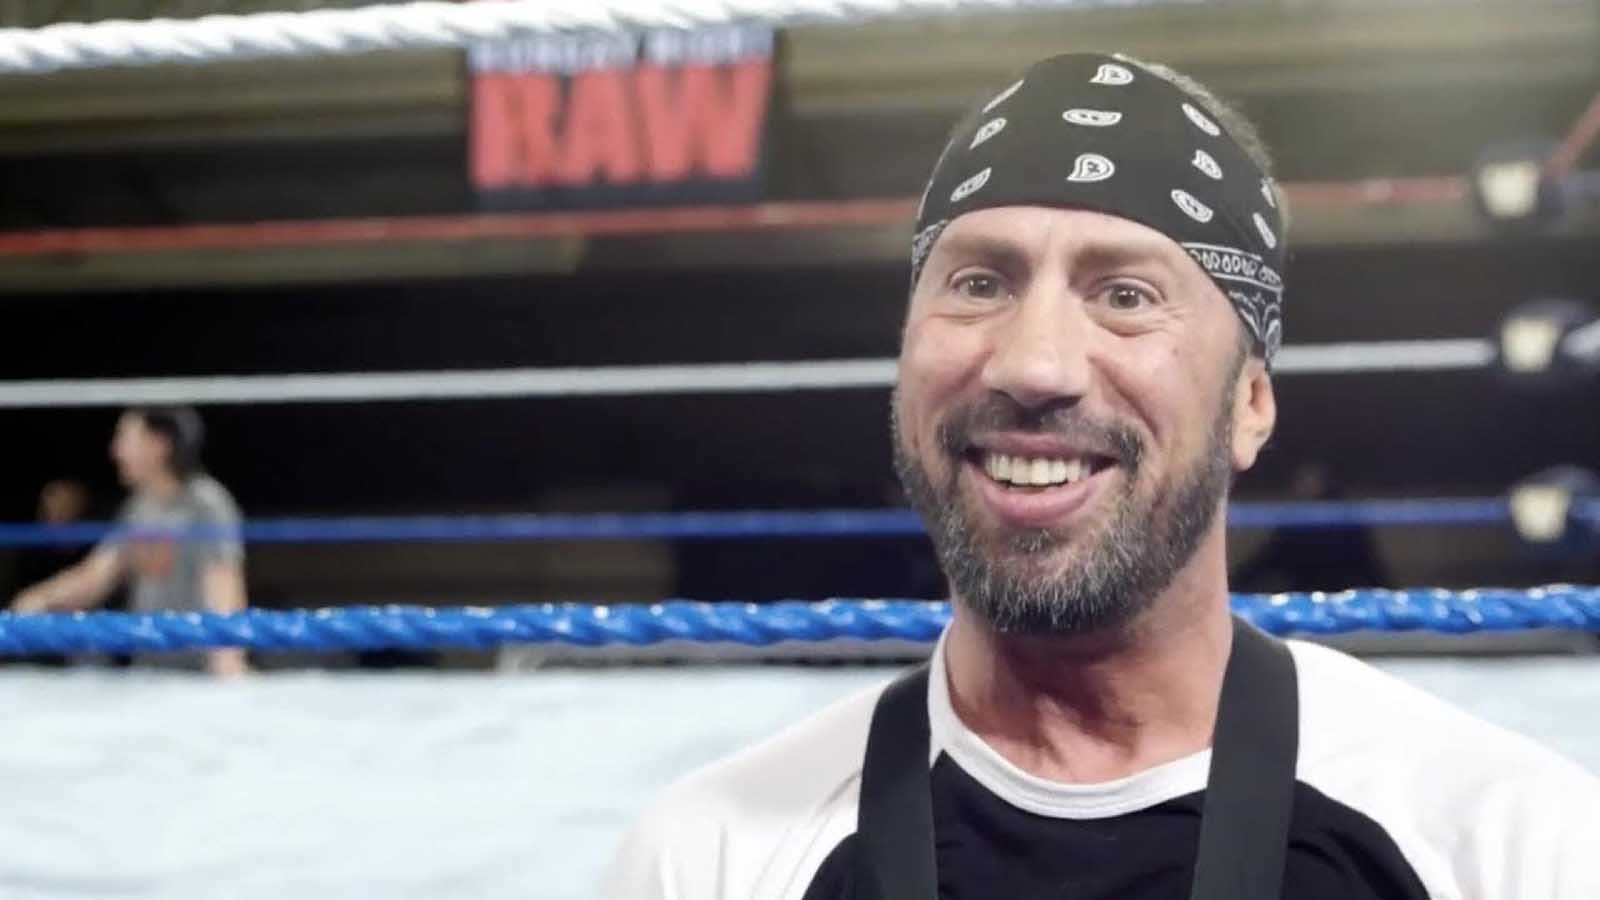 Sean Waltman — better known as X-Pac, may finally be making his grand return to the WWE. Read his announcement here.